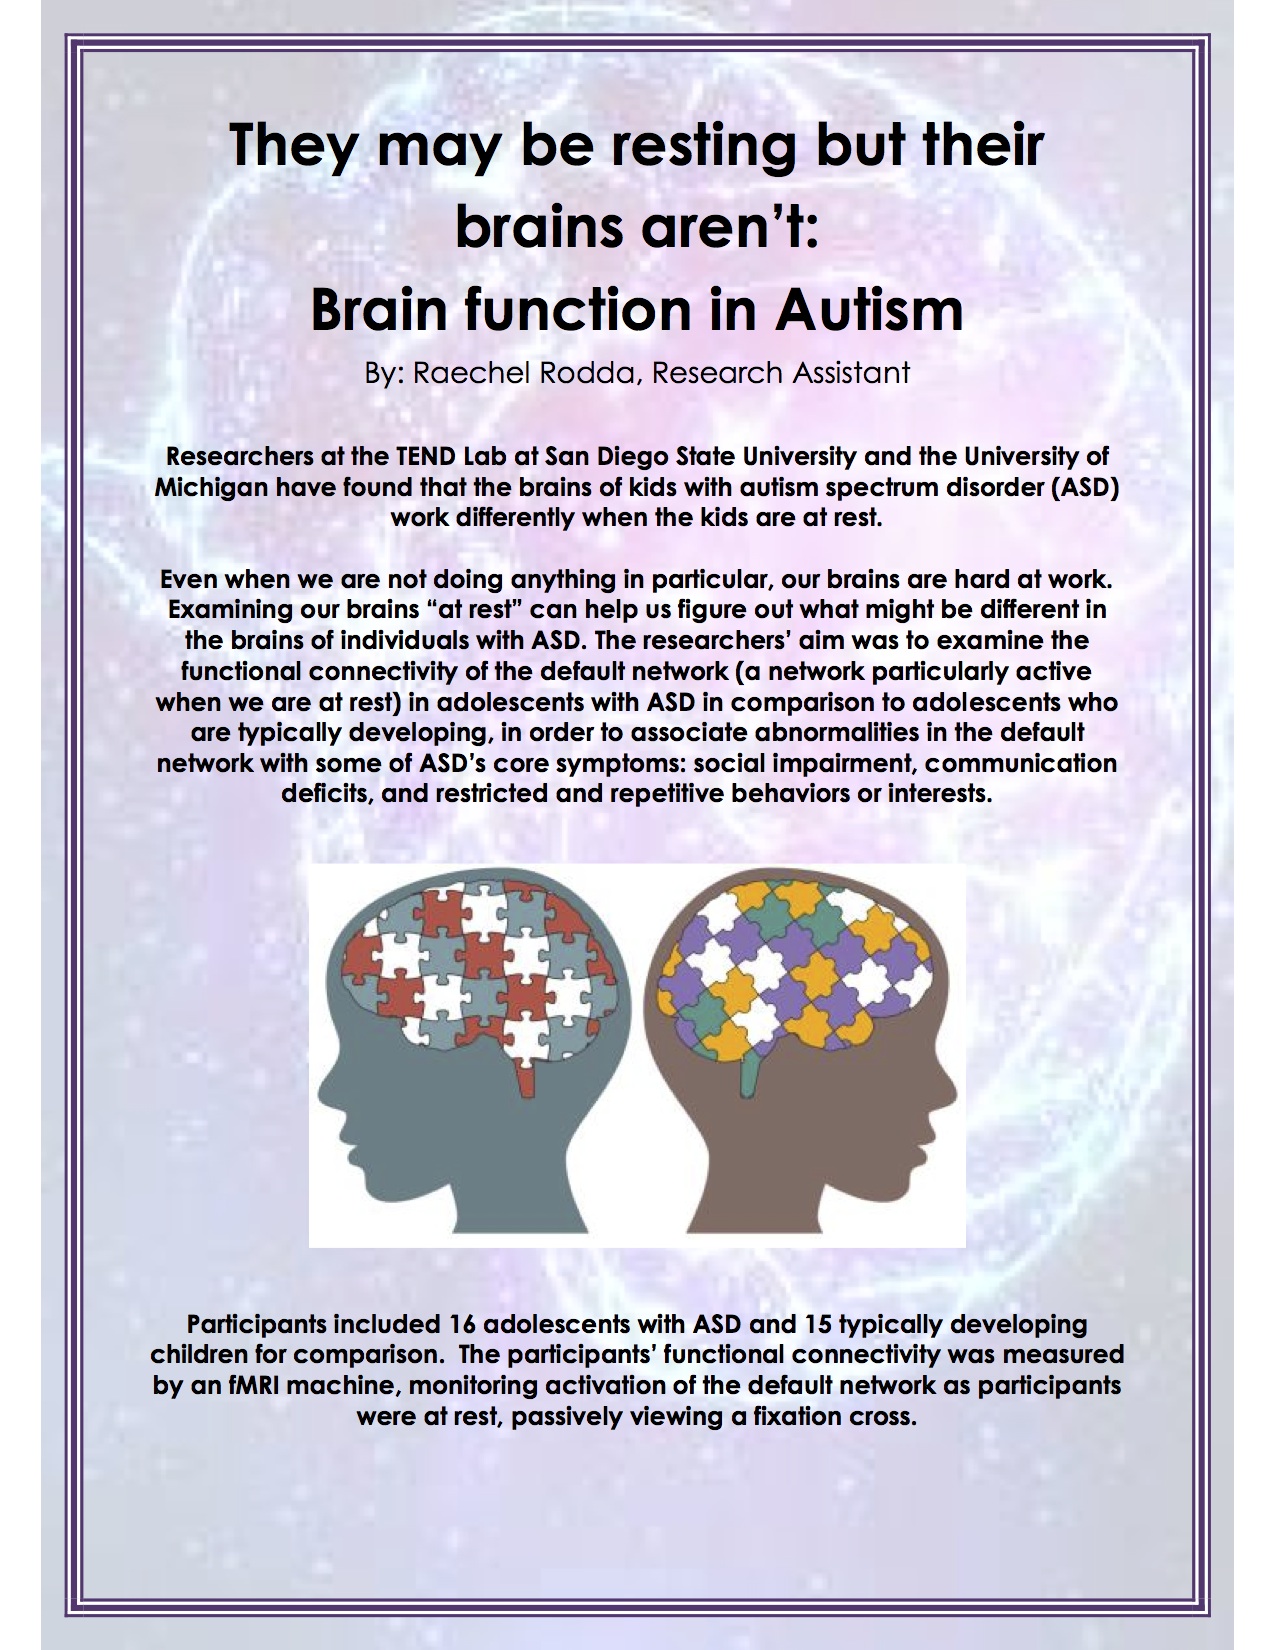 ASD news article page 1 titled: They may be resting, but their brains aren’t: Brain function in Autism